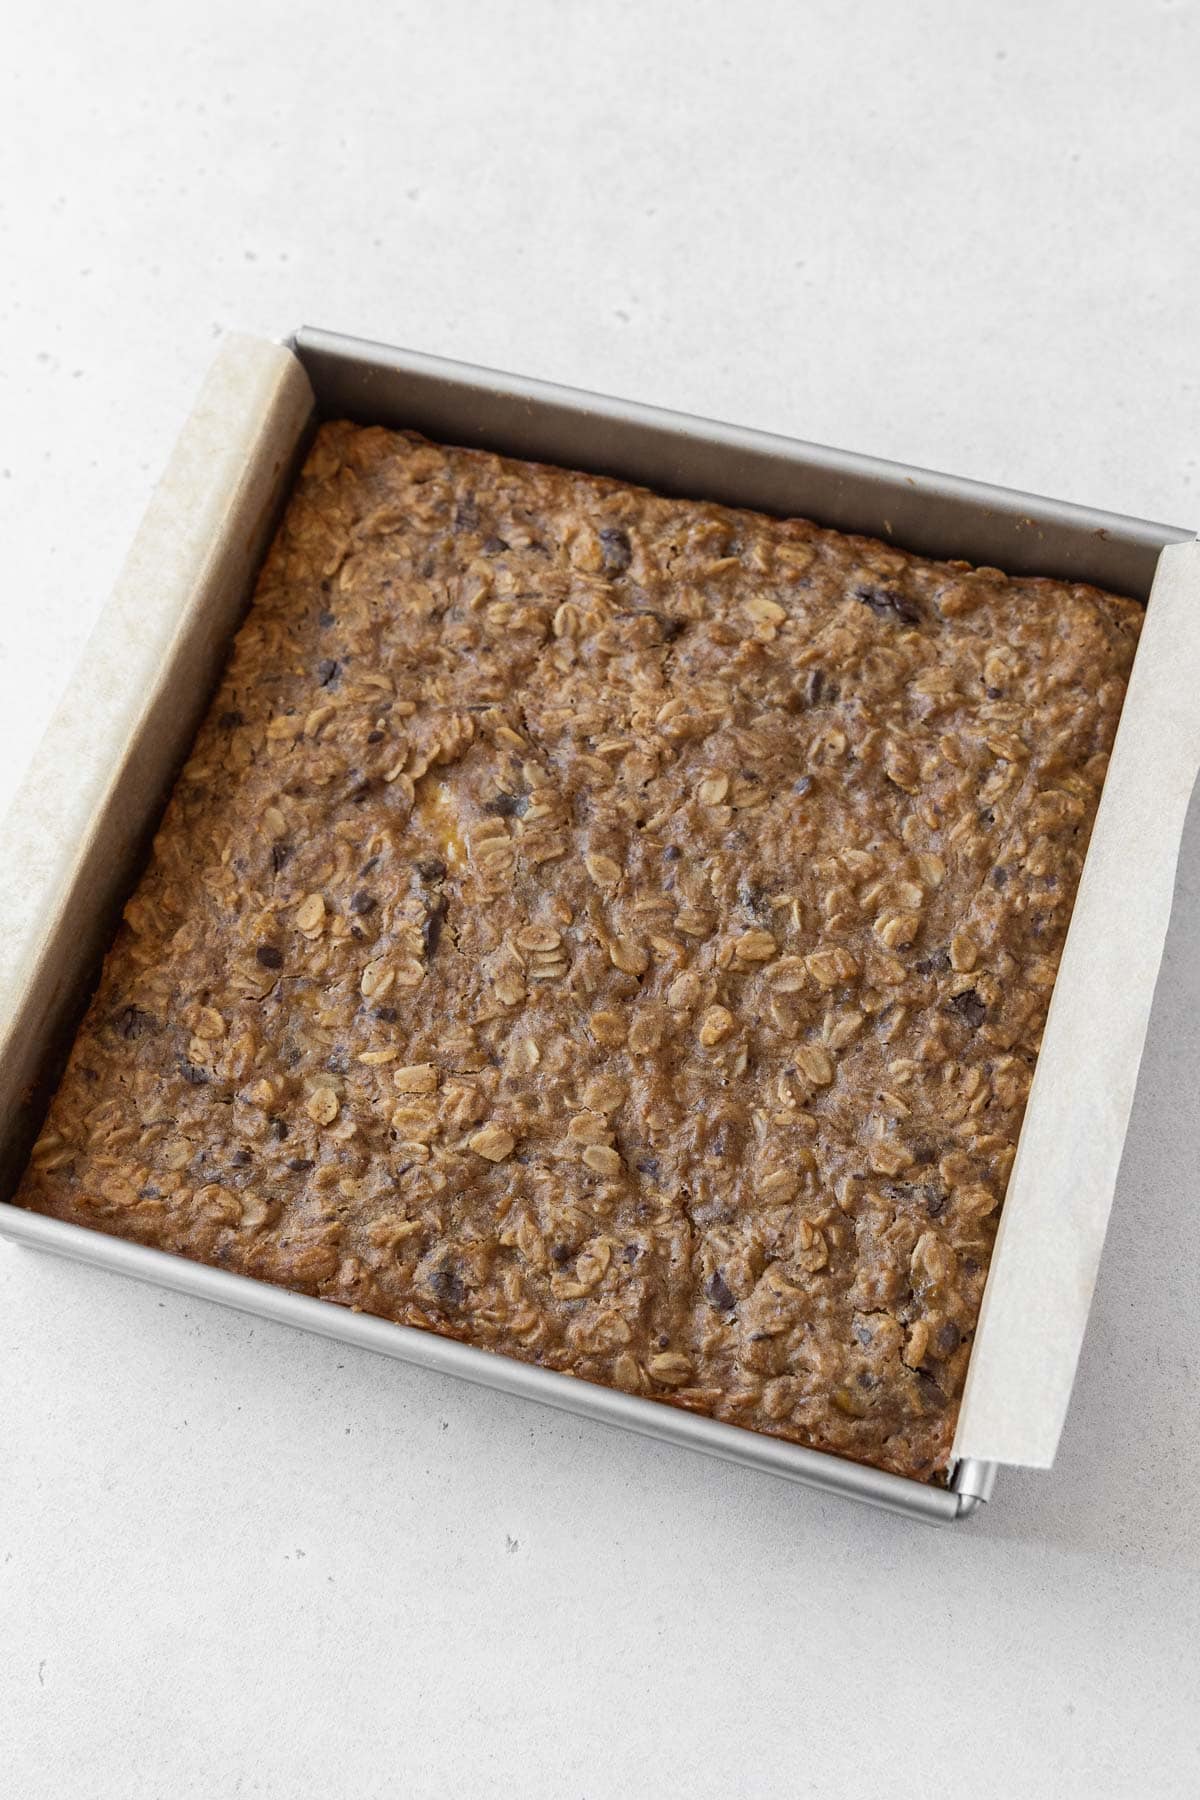 A baked pan of peanut butter banana oatmeal bars on the counter.